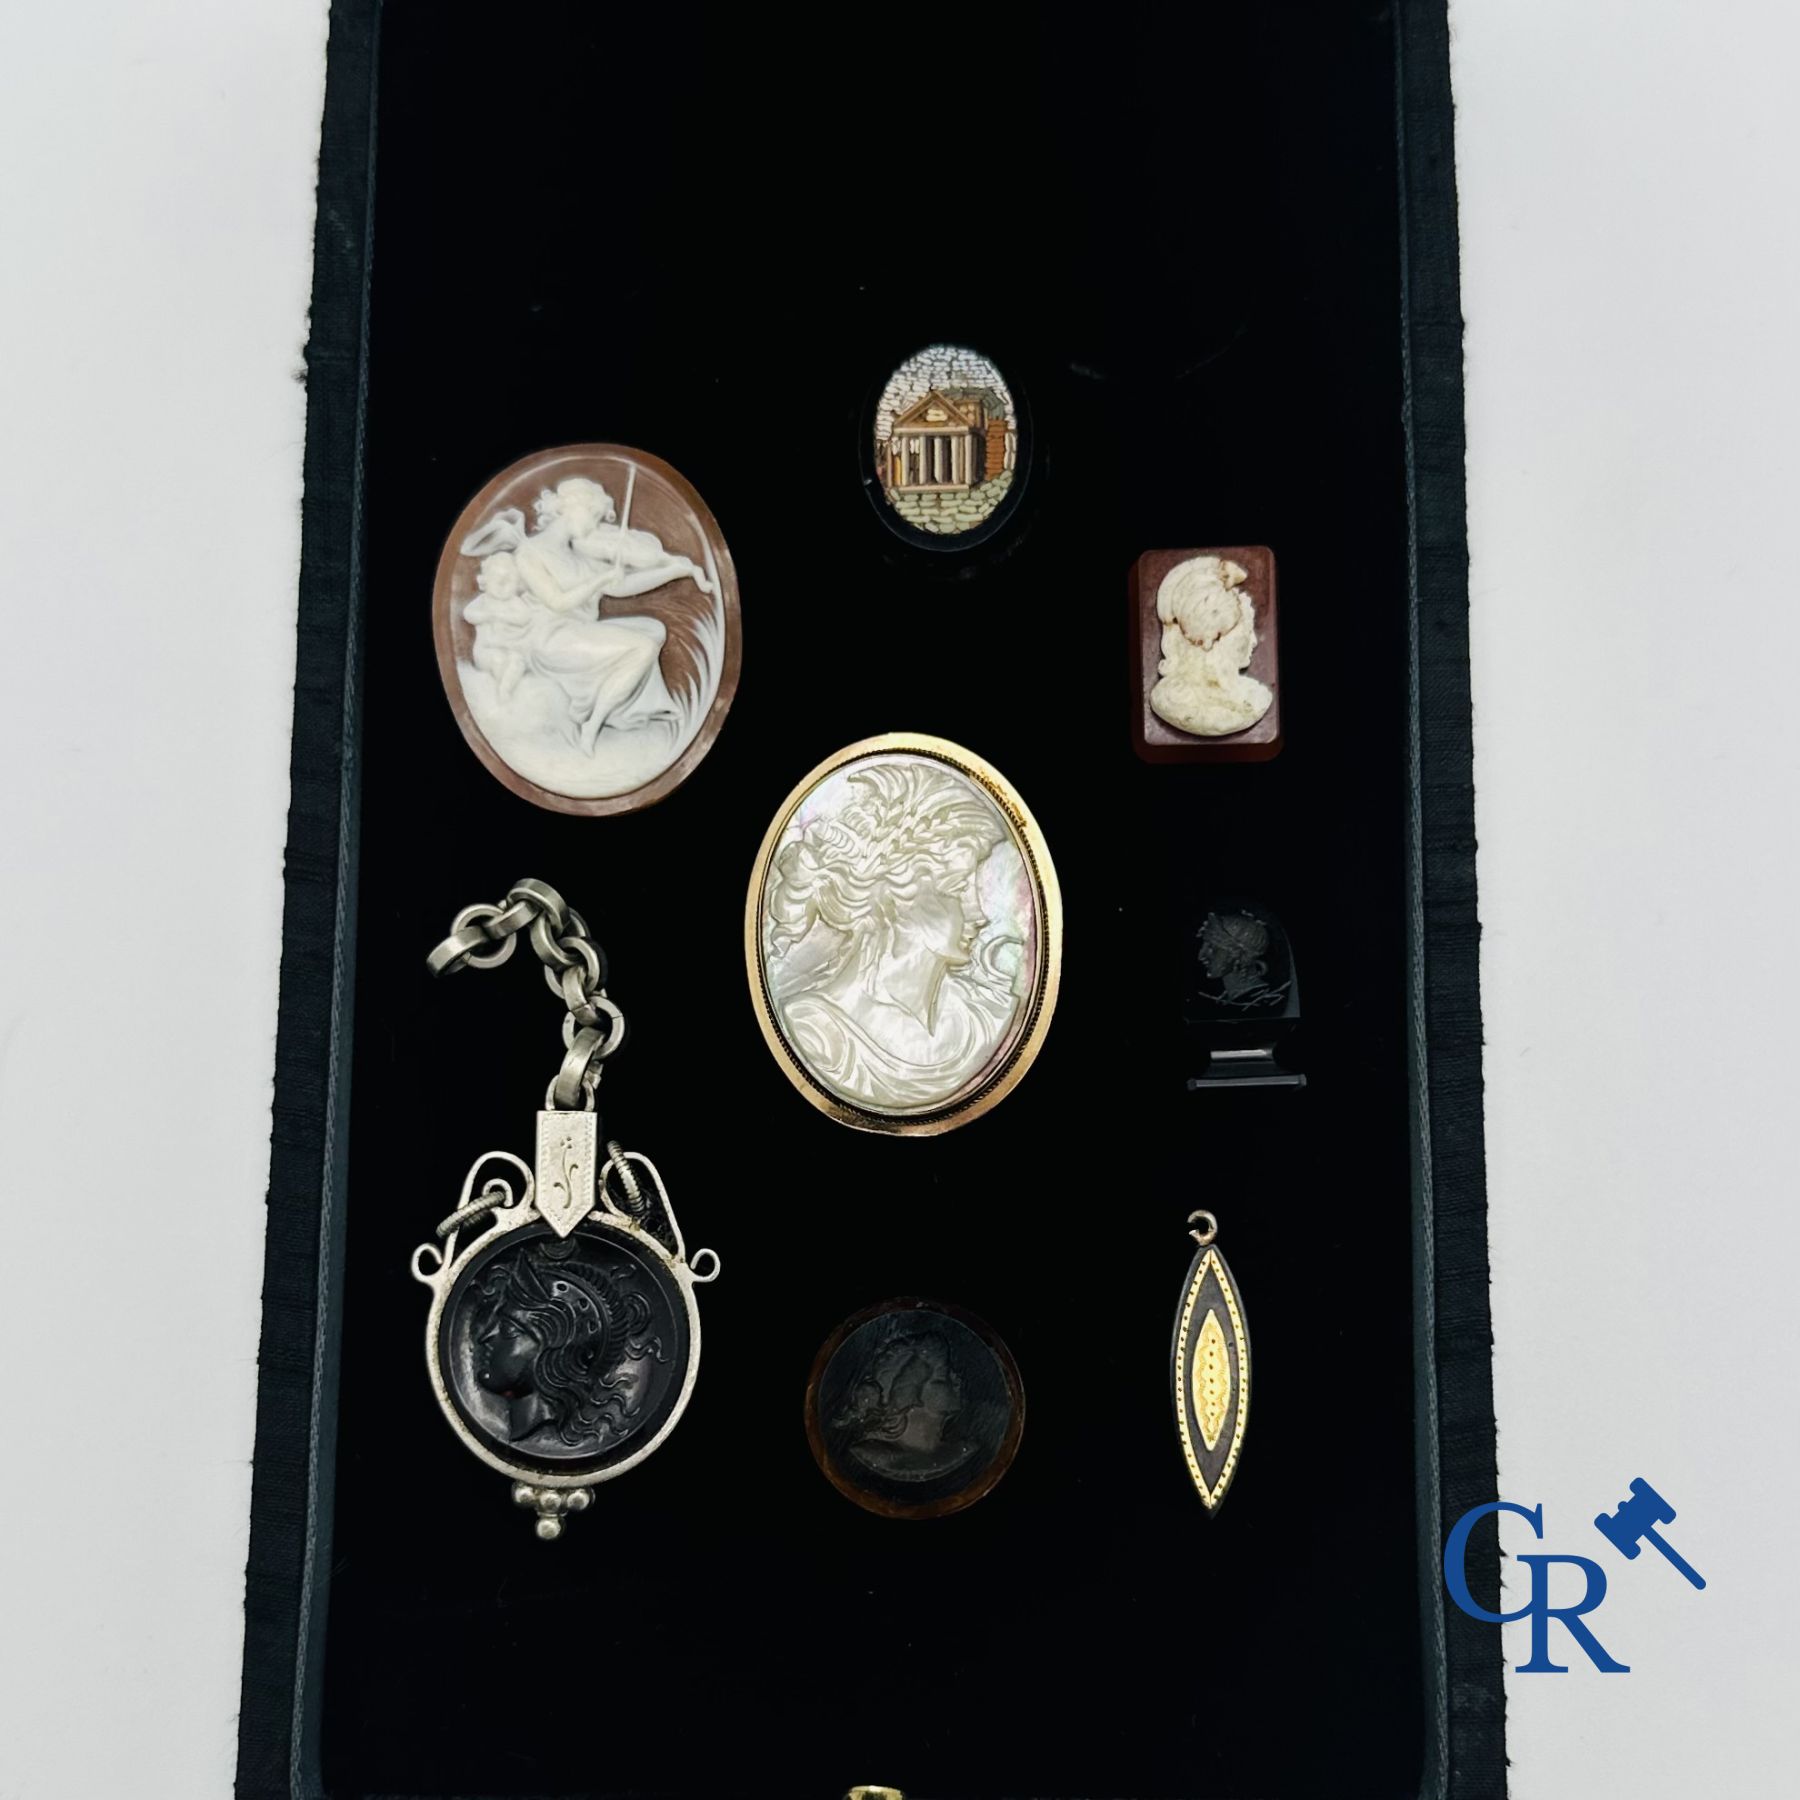 Jewellery: Lot consisting of brooch with cameo 14K, 5 cameos, a micro mosaic and a pendant.